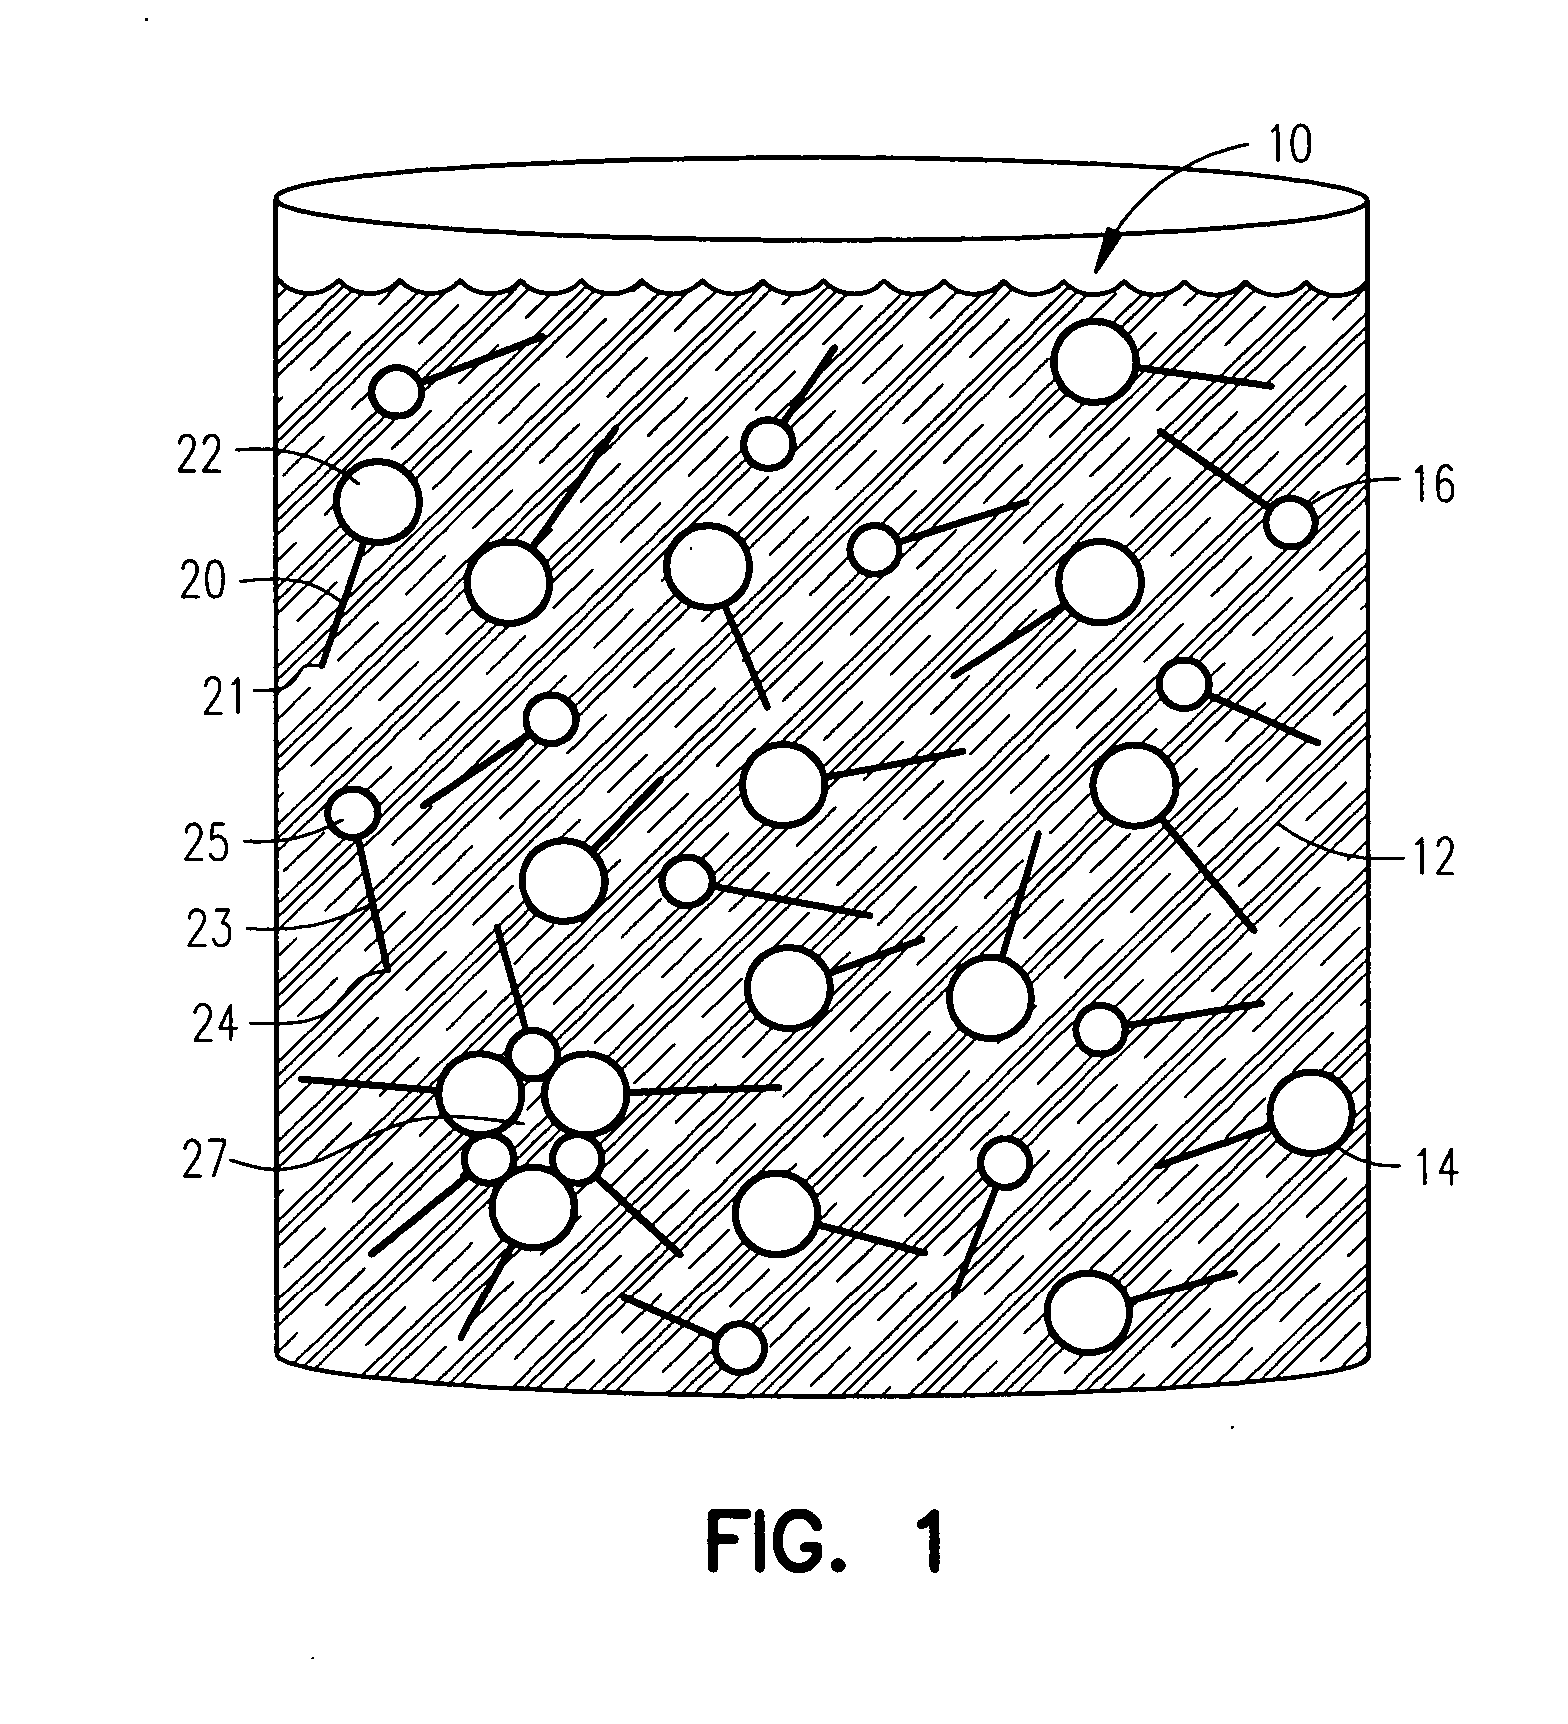 Compositions and methods for forming fibers of synthetic detergents